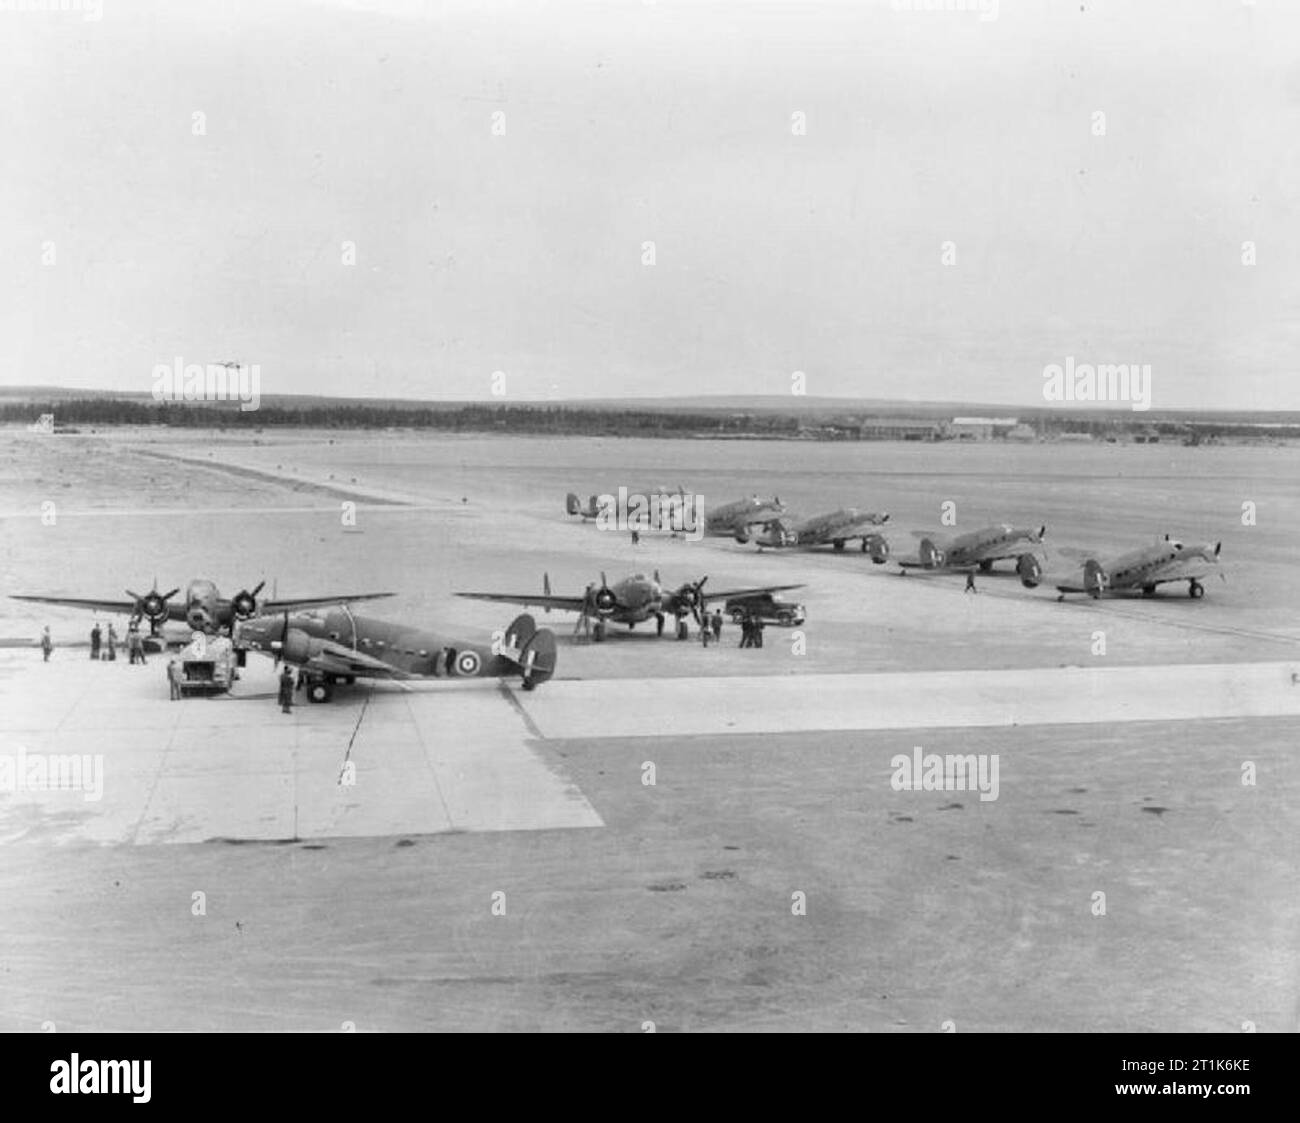 Royal Air Force Ferry Command, 1941-1943. Lockheed Hudson Mark IIIs are prepared for their trans-Atlantic ferry flights at Gander, Newfoundland. At left, one is being refuelled for the journey while two aircraft facing the camera undergo engine checks. Five aircraft facing the runway are ready for the flight and a final Hudson can be seen about to land after flying from the main Ferry Command airport at Dorval, Ontario. Stock Photo